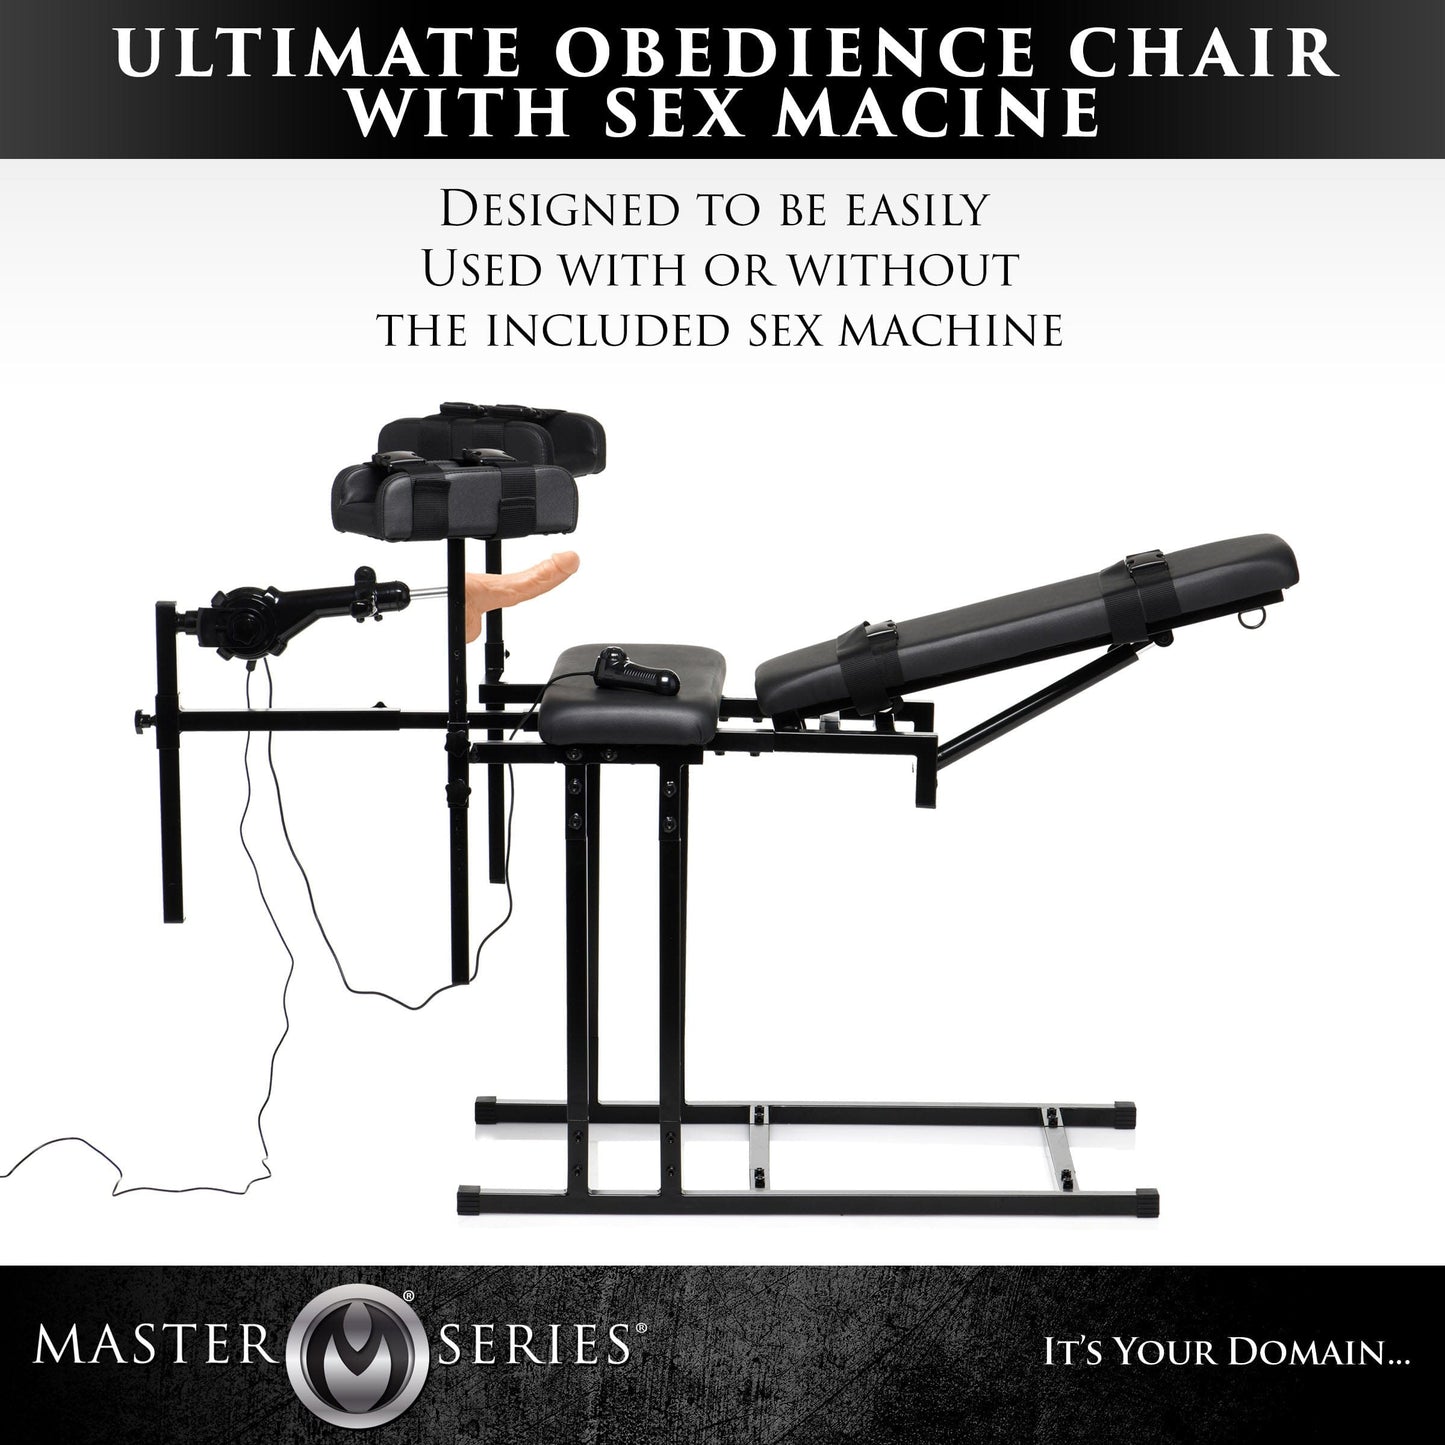 Master Series Thrusting Machine Black Master Series Ultimate Obedience Chair With Sex Machine at the Haus of Shag